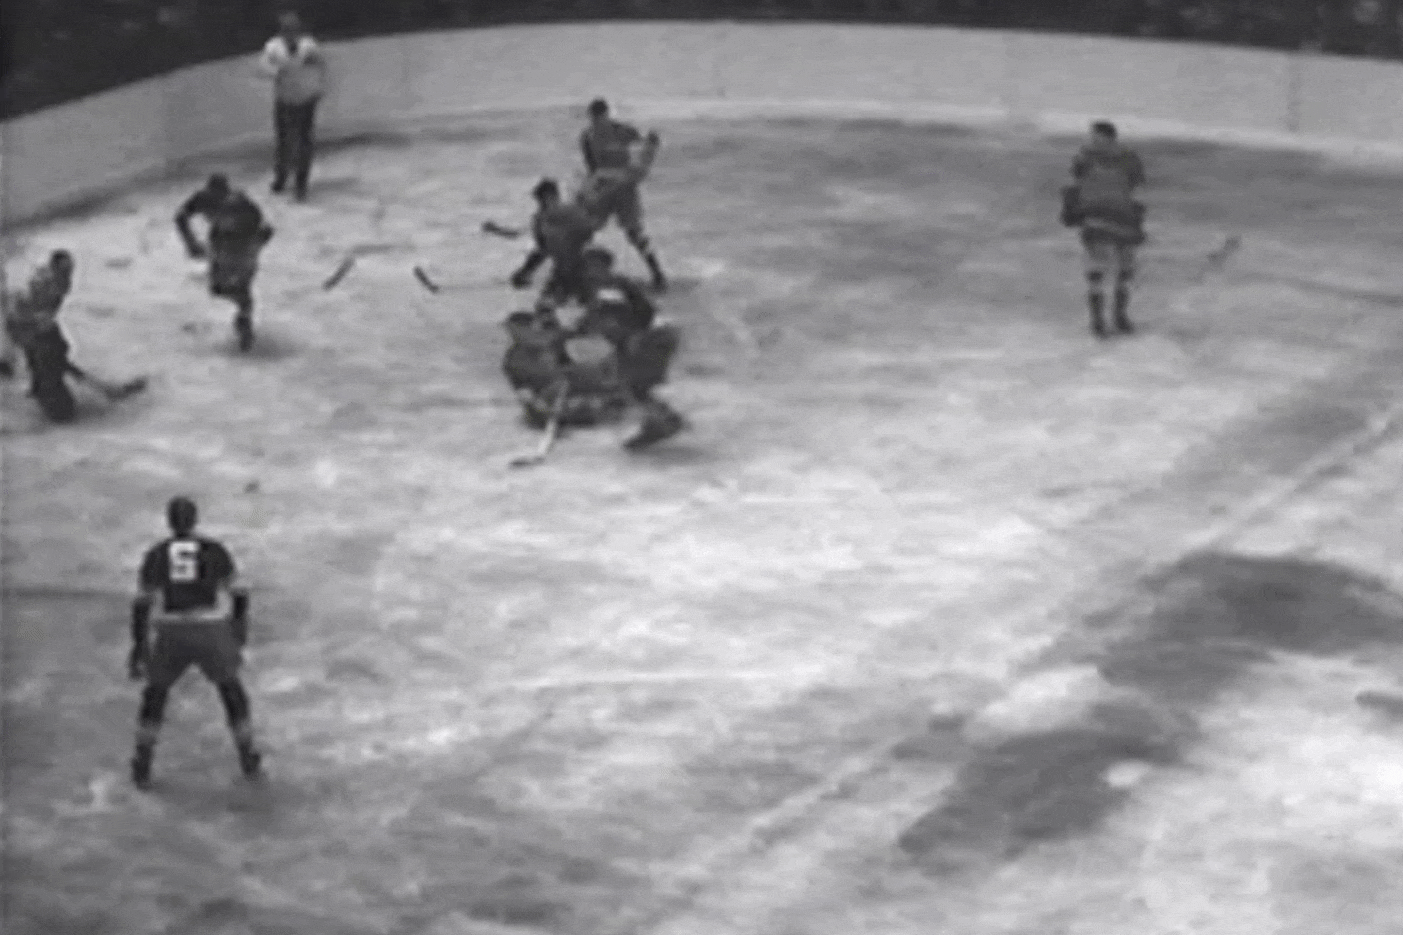 This Day in Hockey History – January 5, 1930 – They Say It's Your